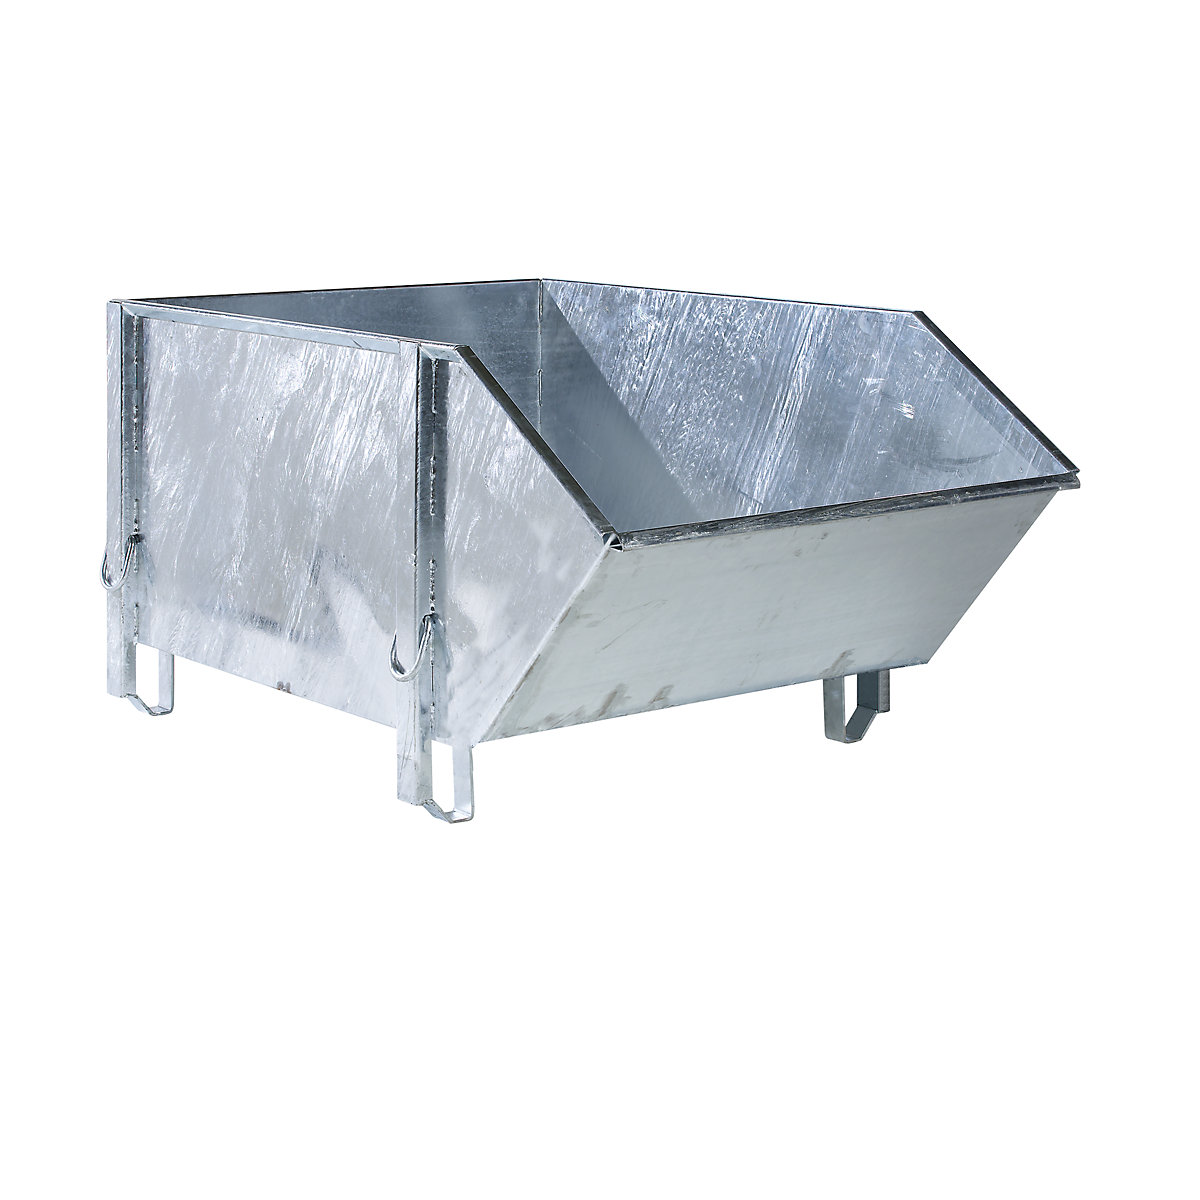 Sheet steel container – eurokraft pro, capacity 1 m³, without folding chute, galvanised-8